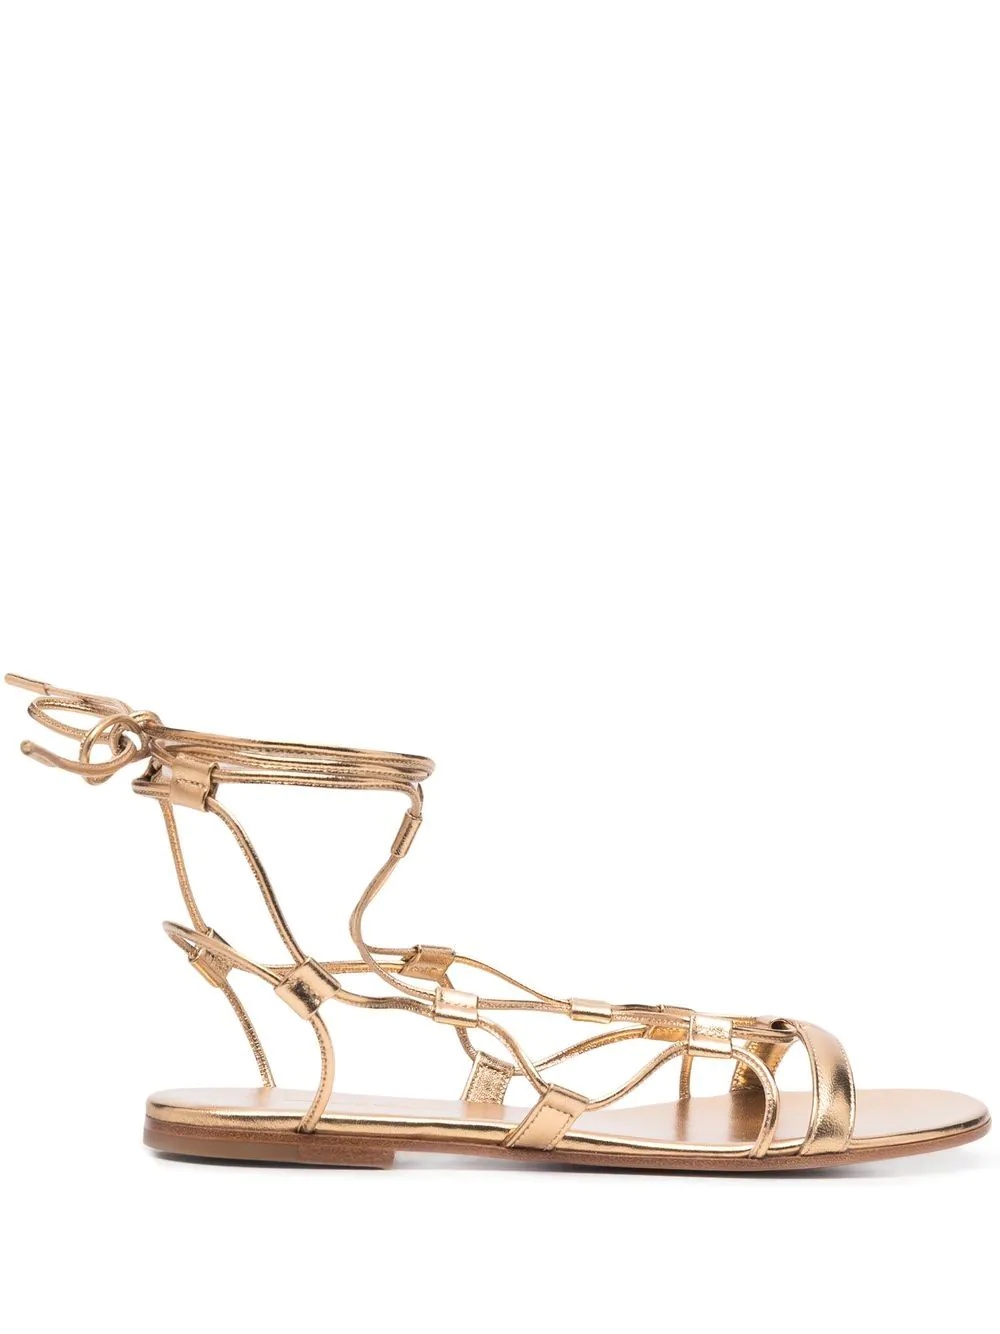 multi-way strap leather sandals - 1